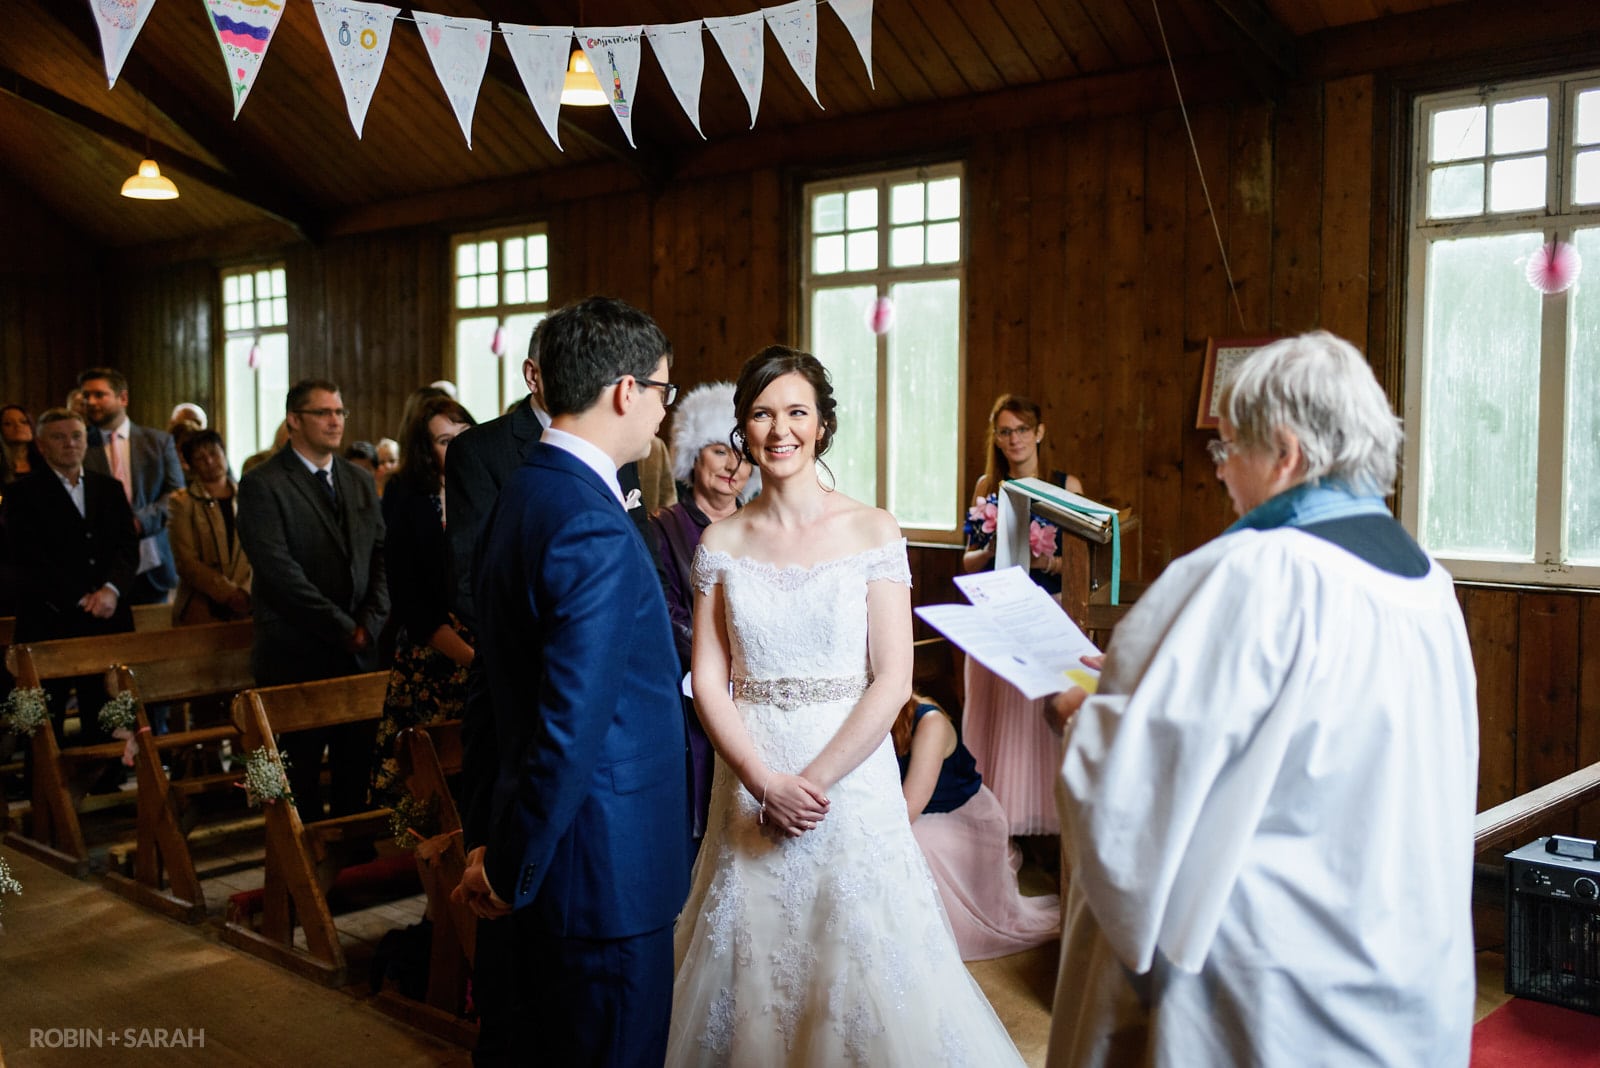 Bride and groom exchange vows during wedding blessing at Avoncroft Museum